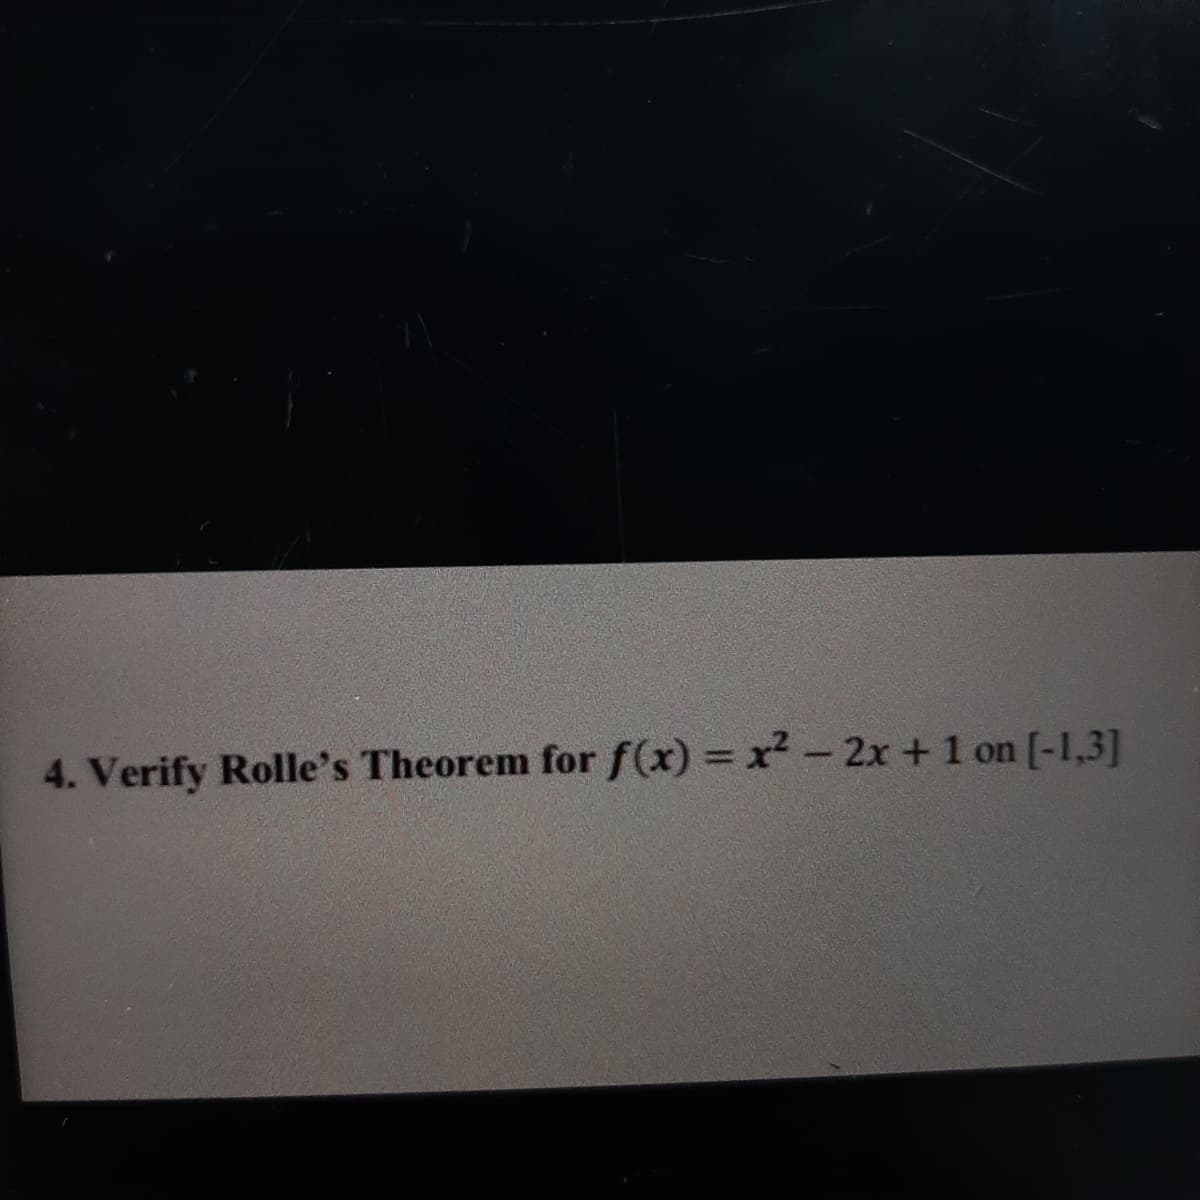 4. Verify Rolle's Theorem for f(x) = x - 2x +1 on [-1,3]
